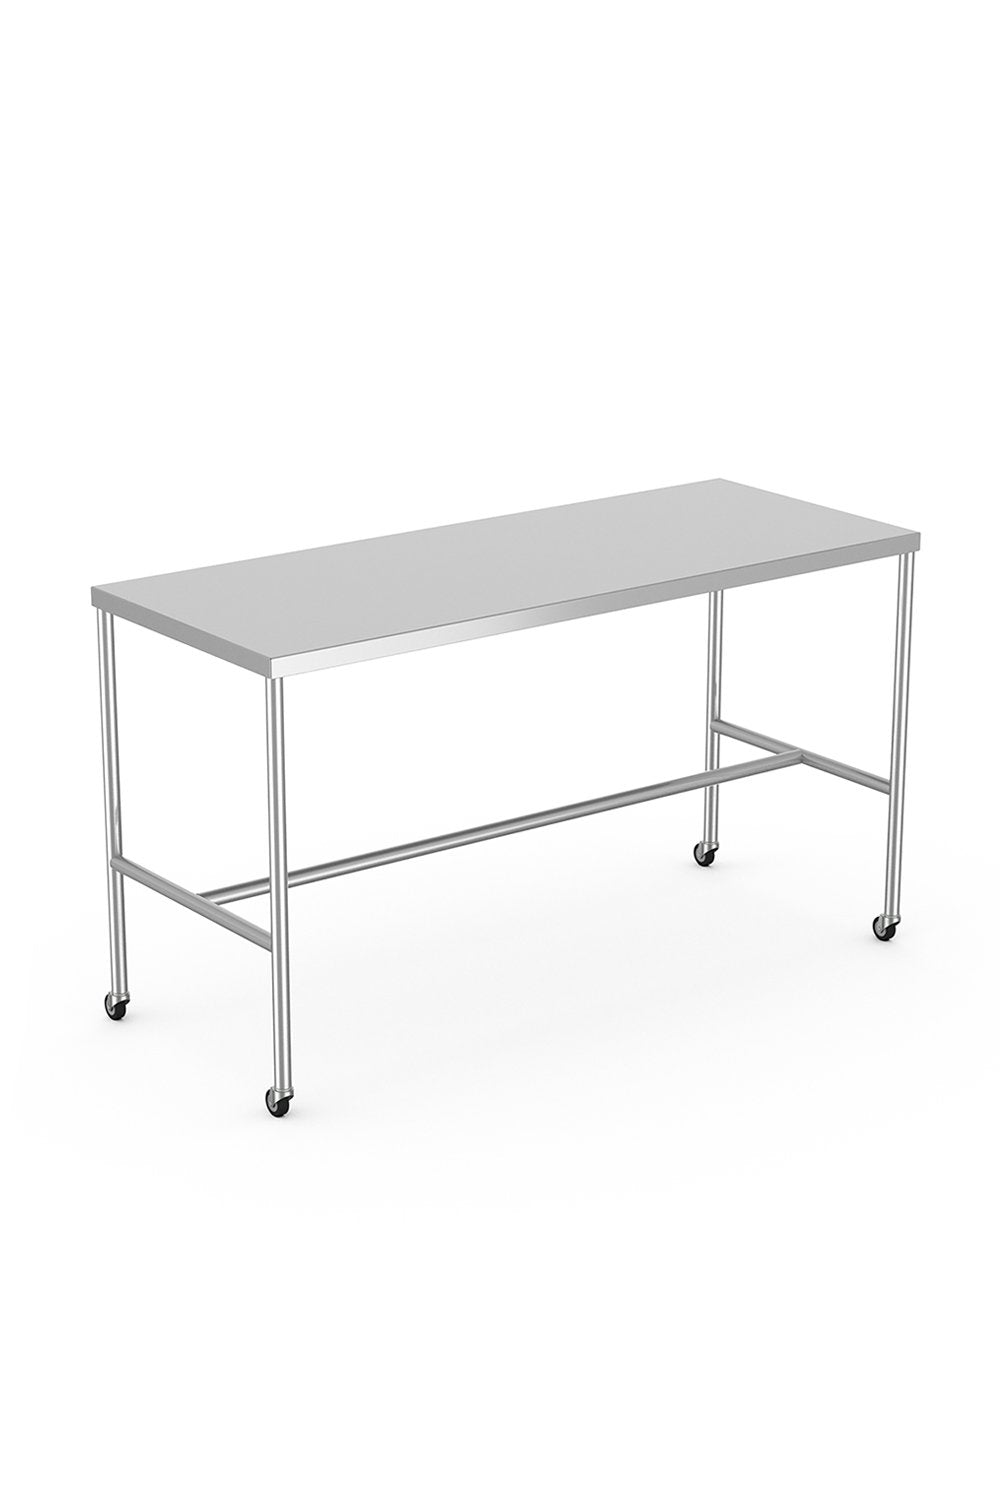 Stainless Steel Table Stainless Solutions Macmedical 24"D x 60"W x 34"H H-Brace 